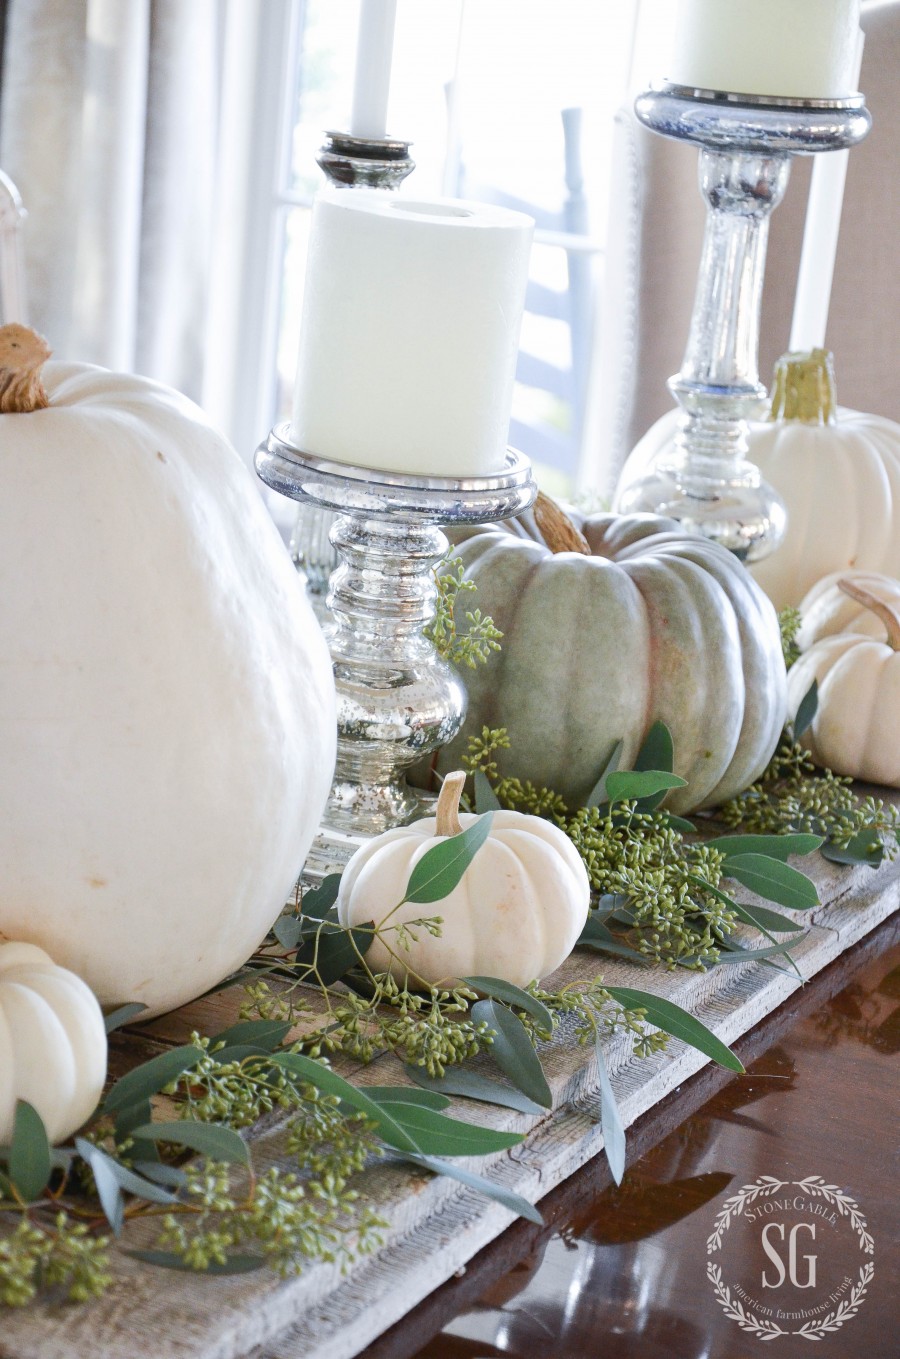 EASY THANKSGIVING CENTERPIECE-It's not hard to create a beautiful Thanksgiving centerpiece. Only 3 elements! 